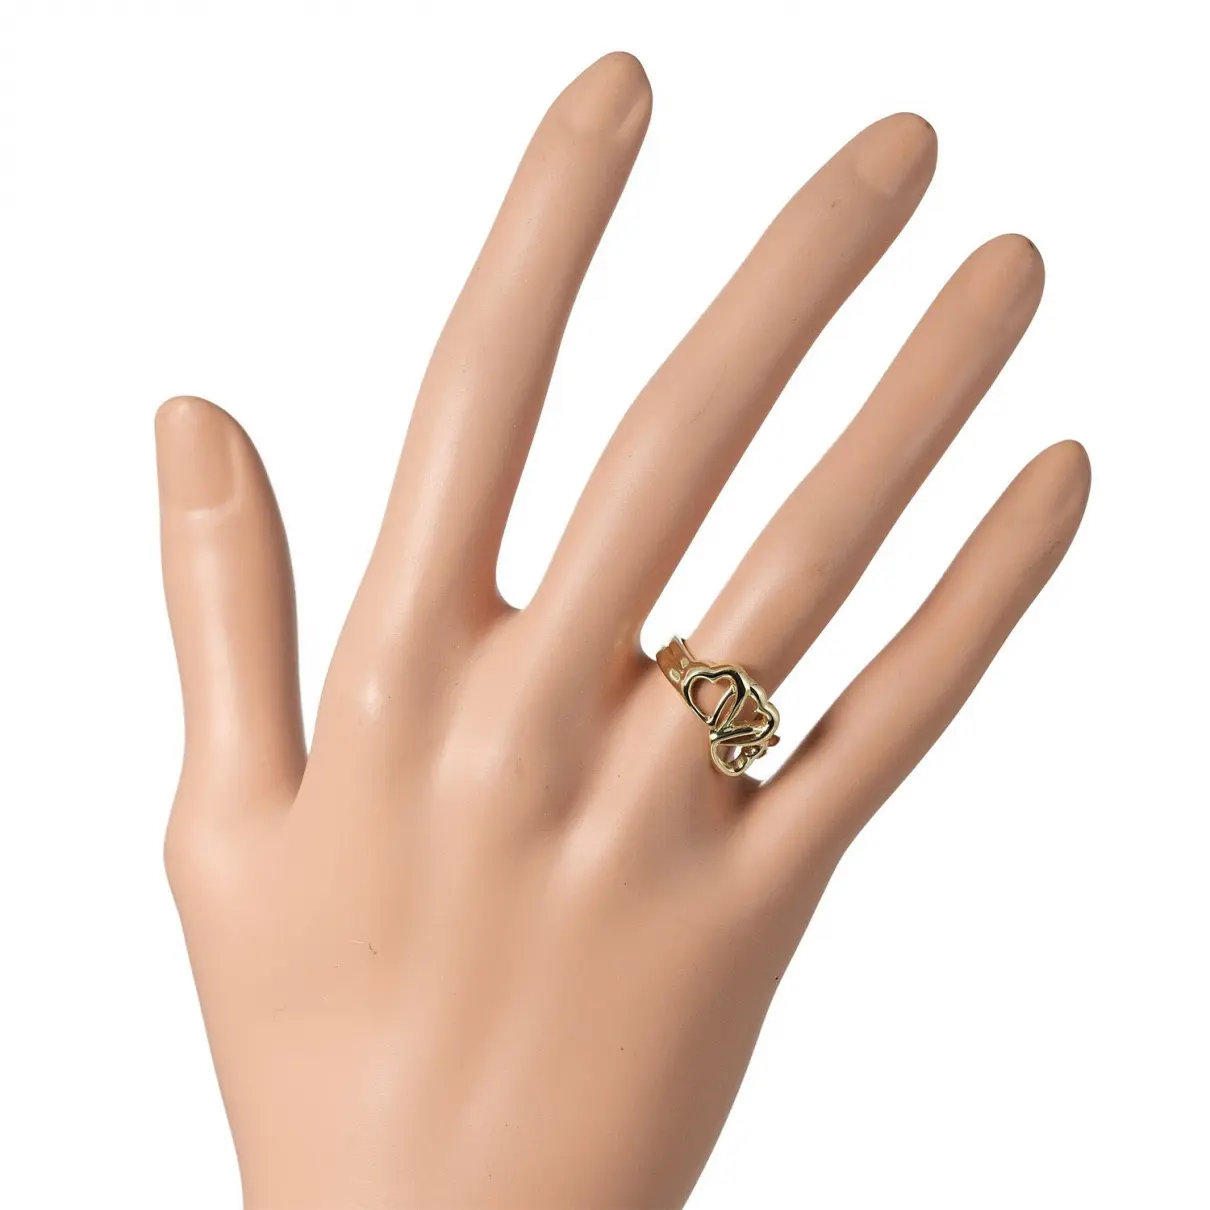 Buy Tiffany & Co Yellow gold ring online